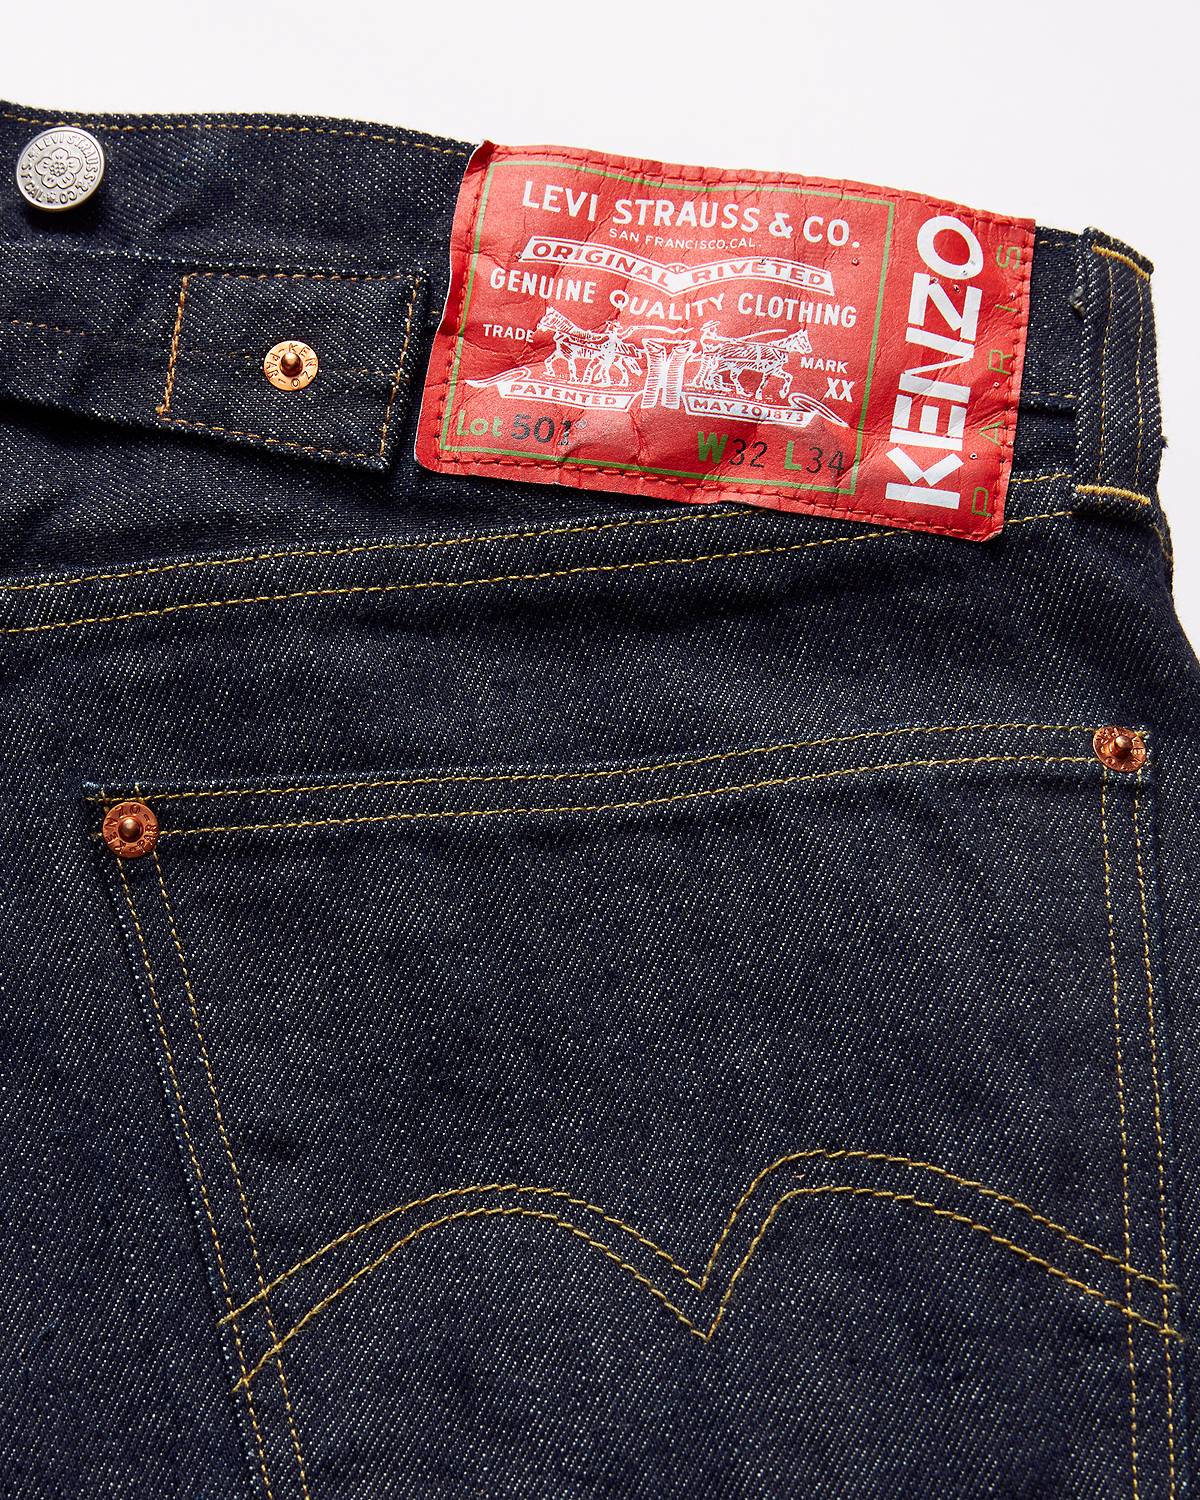 Image of the KENZO x Levi's® collaboration showing the back pocket of a pair of a dark wash denim jeans and bright red backpatch.